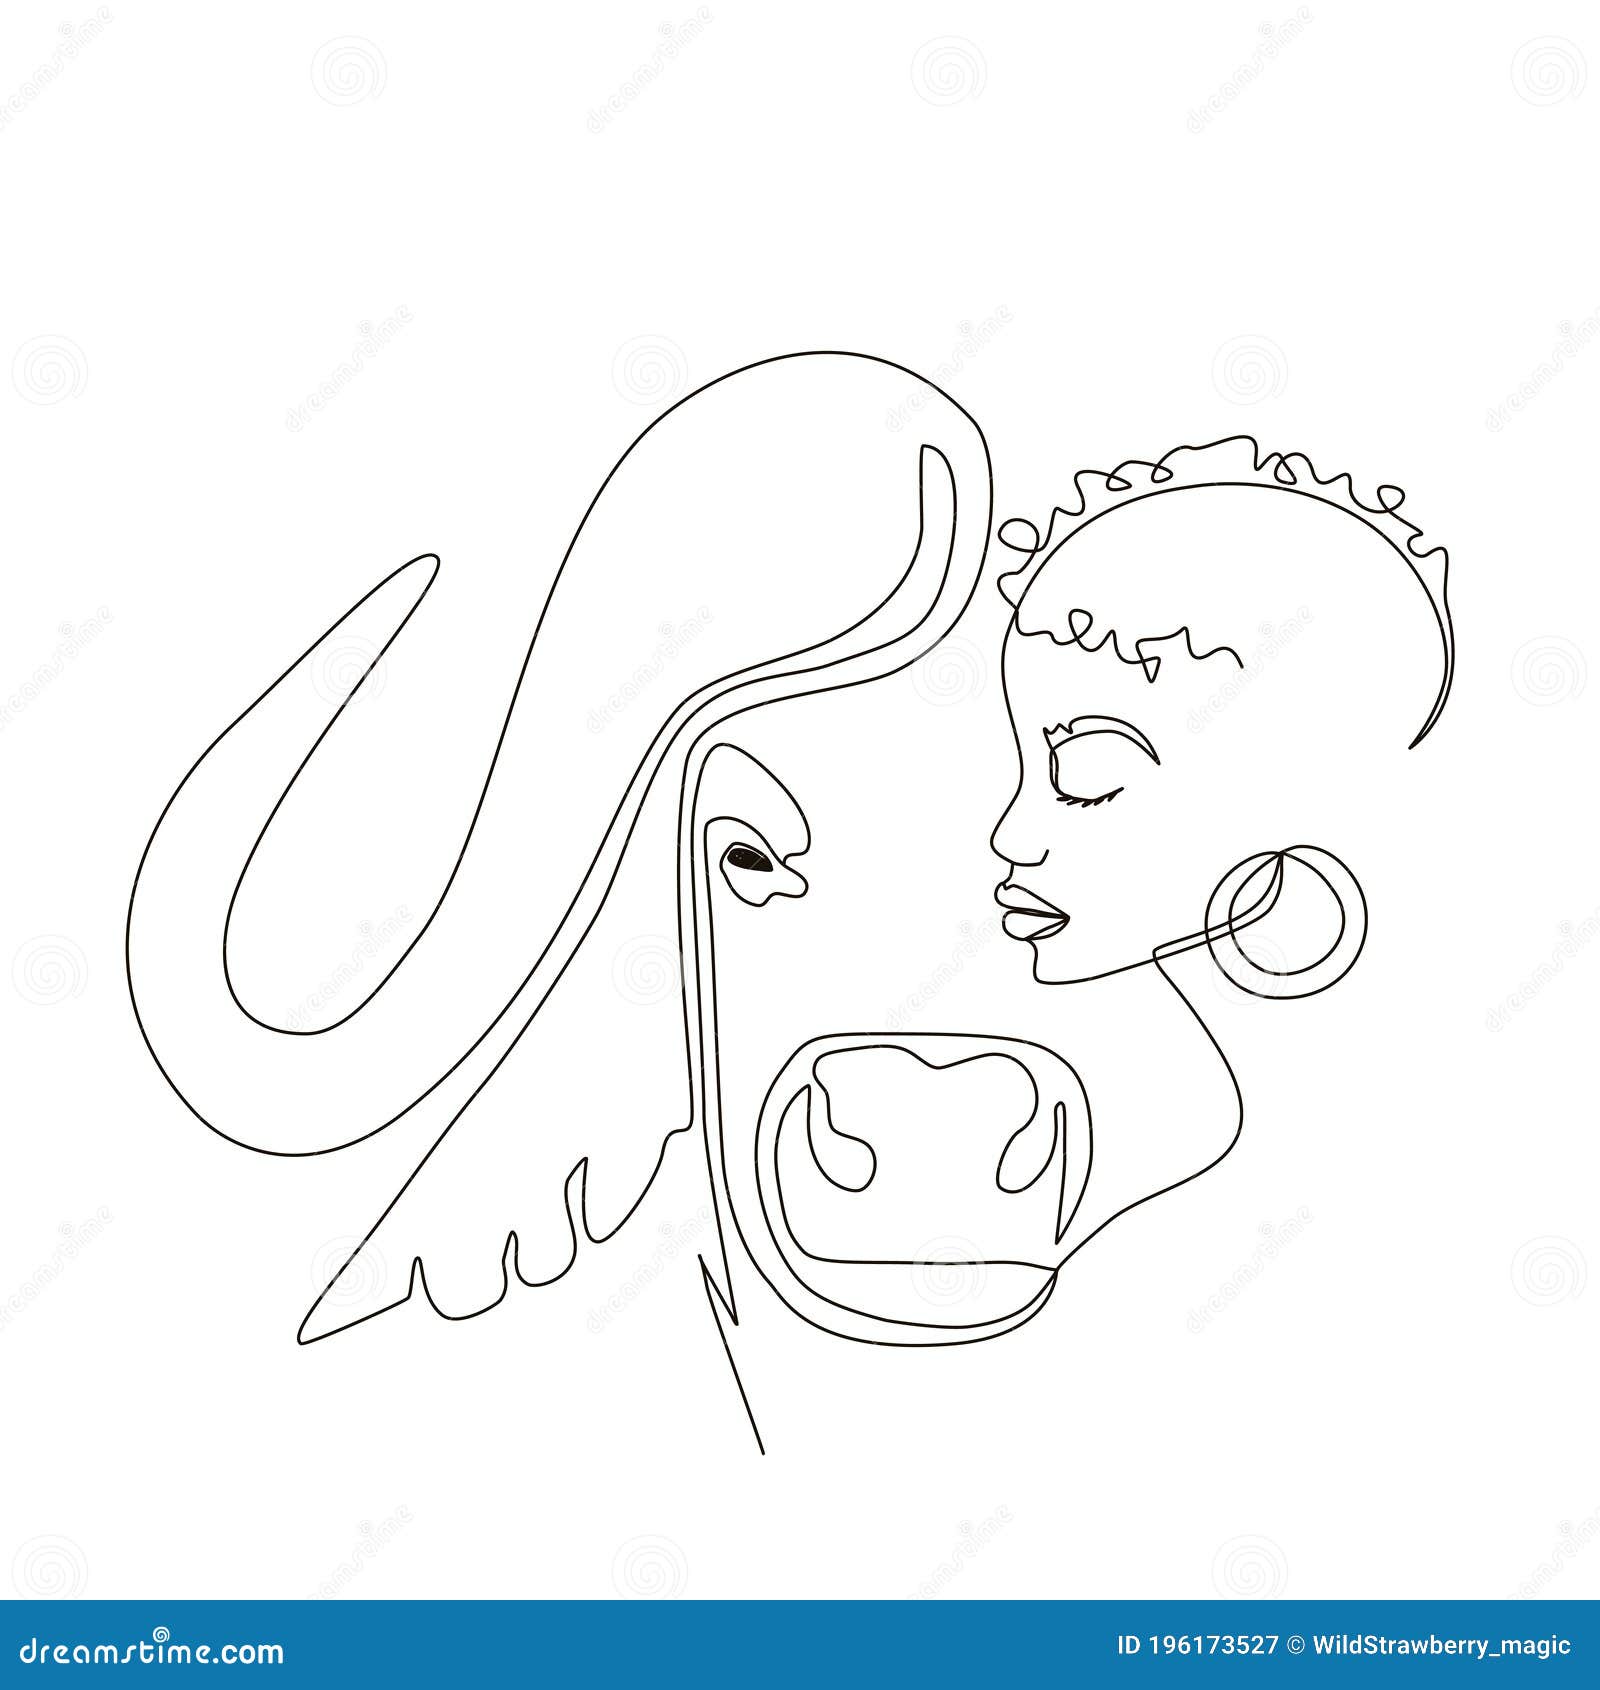 Continuous Line Art Or One Line Drawing African Woman And Buffalo Vector Illustration Numan And Animal Friendship Concept Stock Vector Illustration Of Sketch Woman 196173527